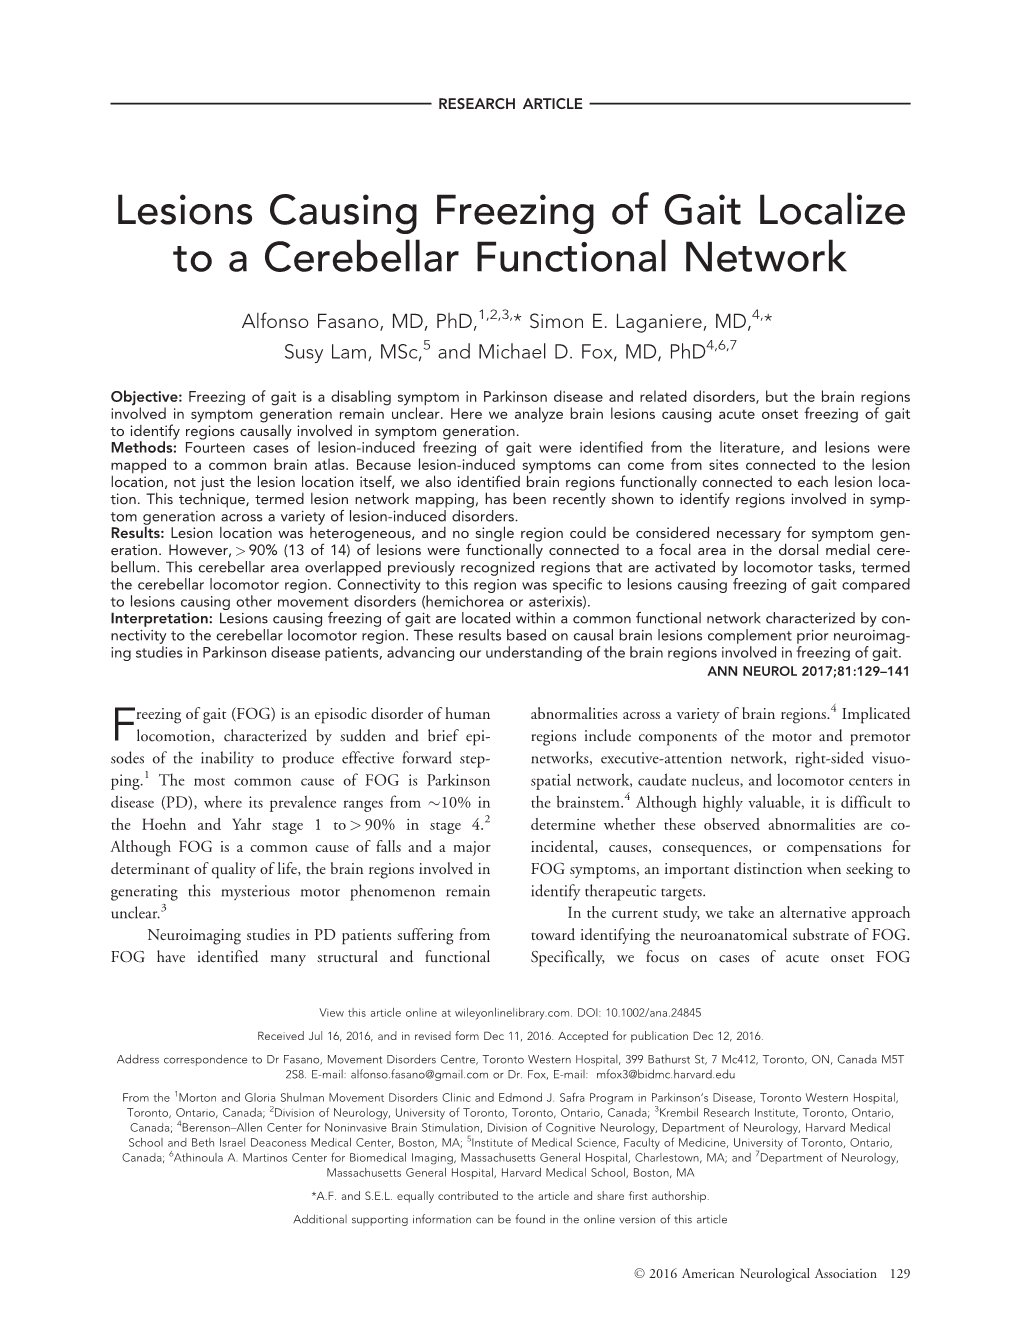 Lesions Causing Freezing of Gait Localize to a Cerebellar Functional Network